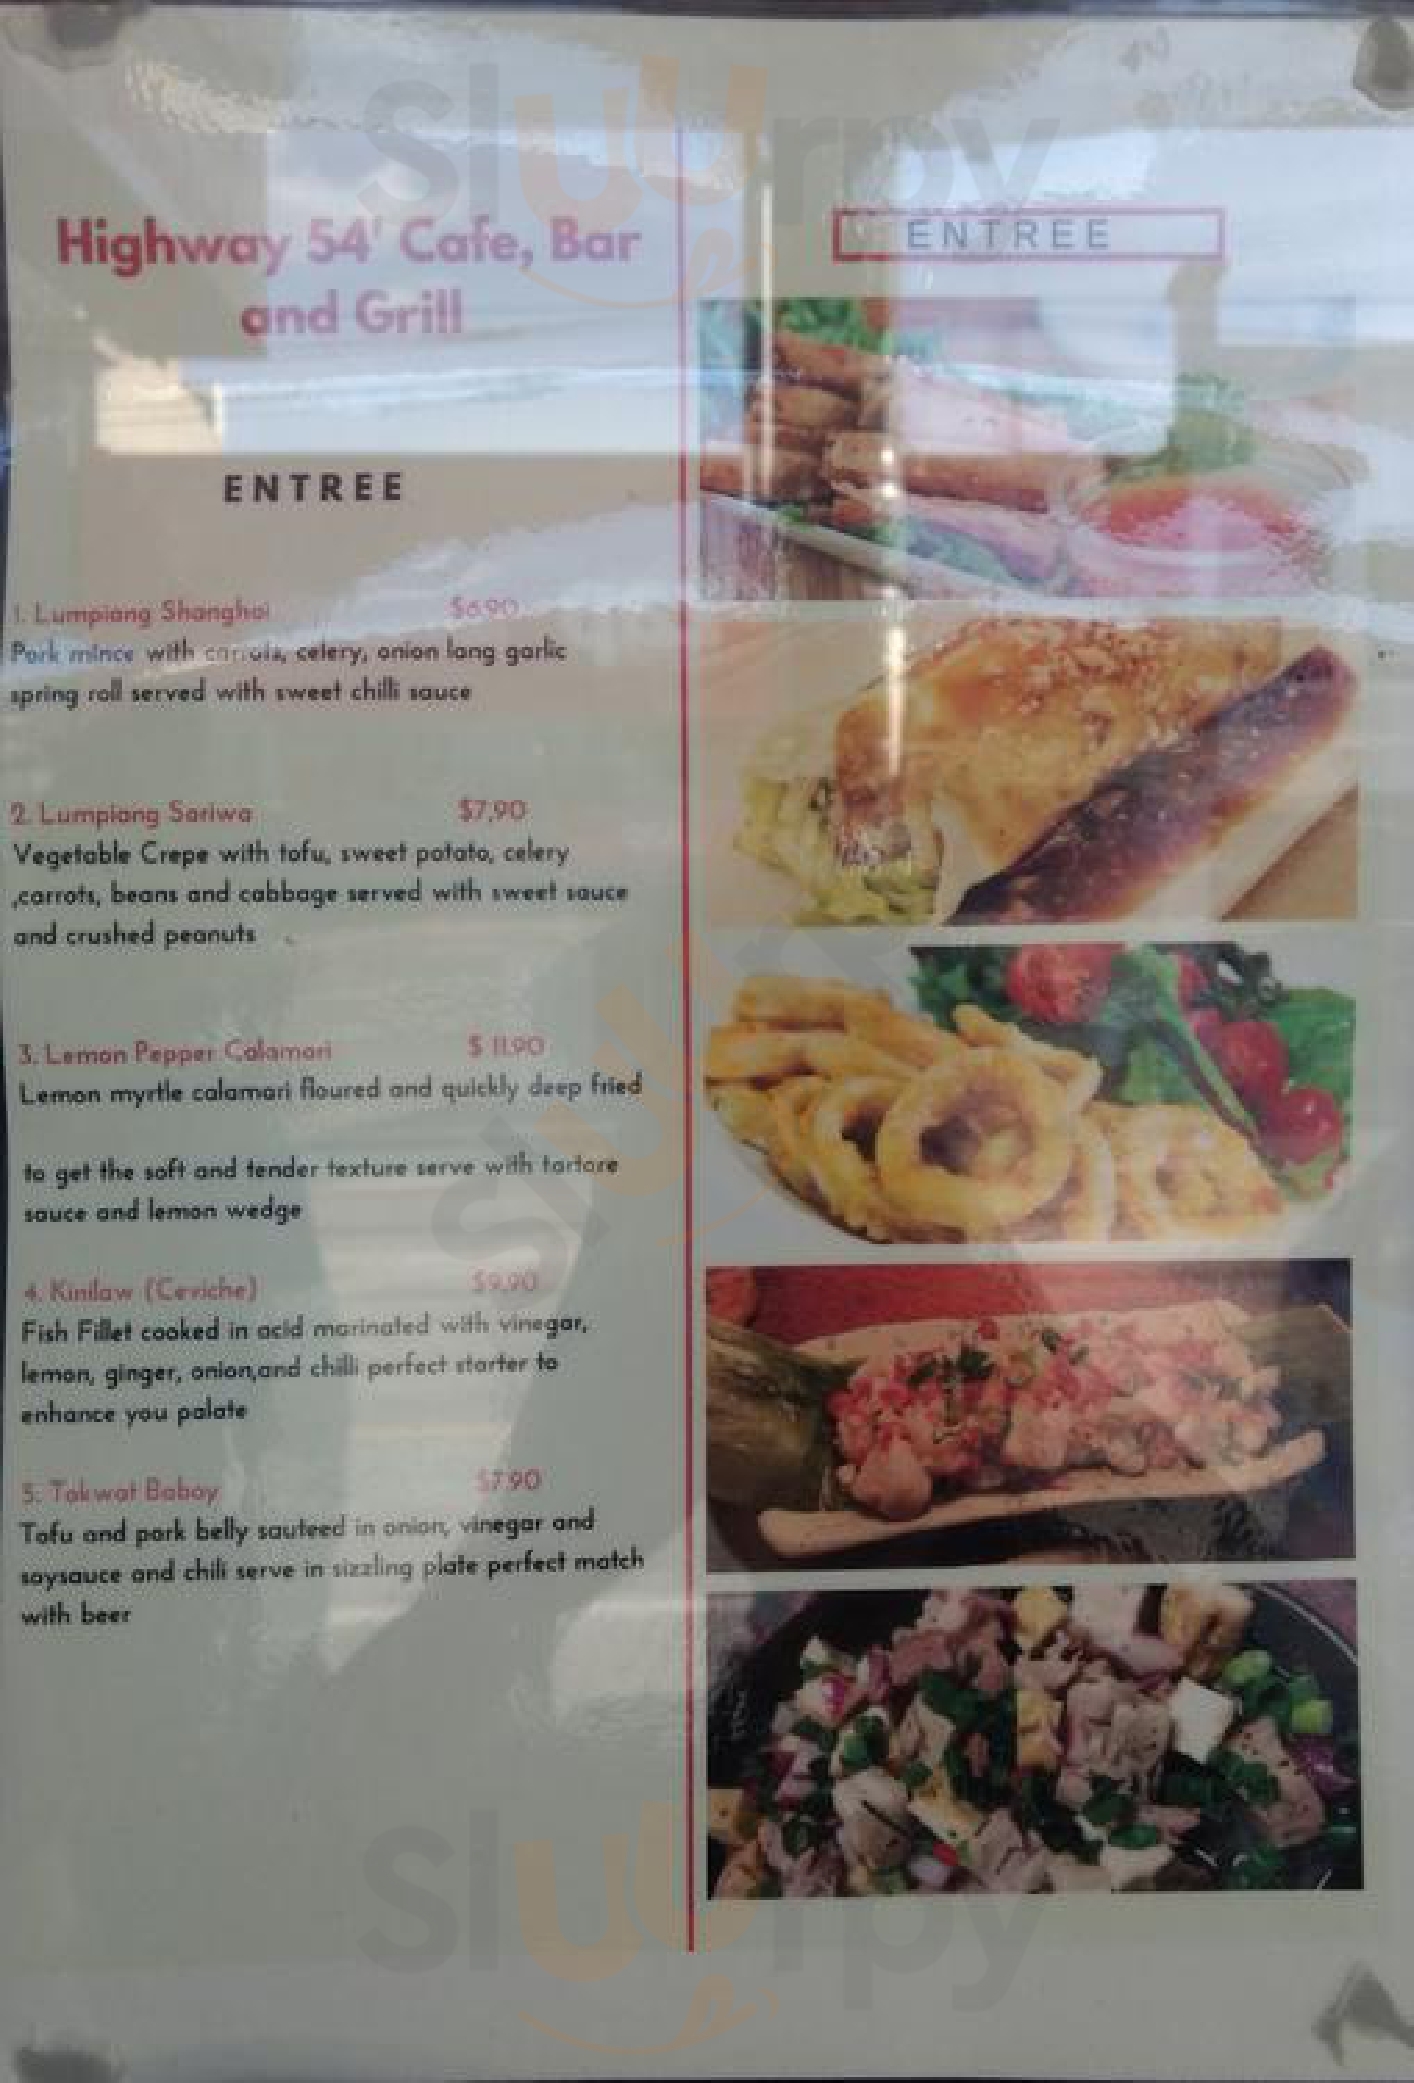 Highway 54 Cafe Bar And Grill Hawthorn Menu - 1